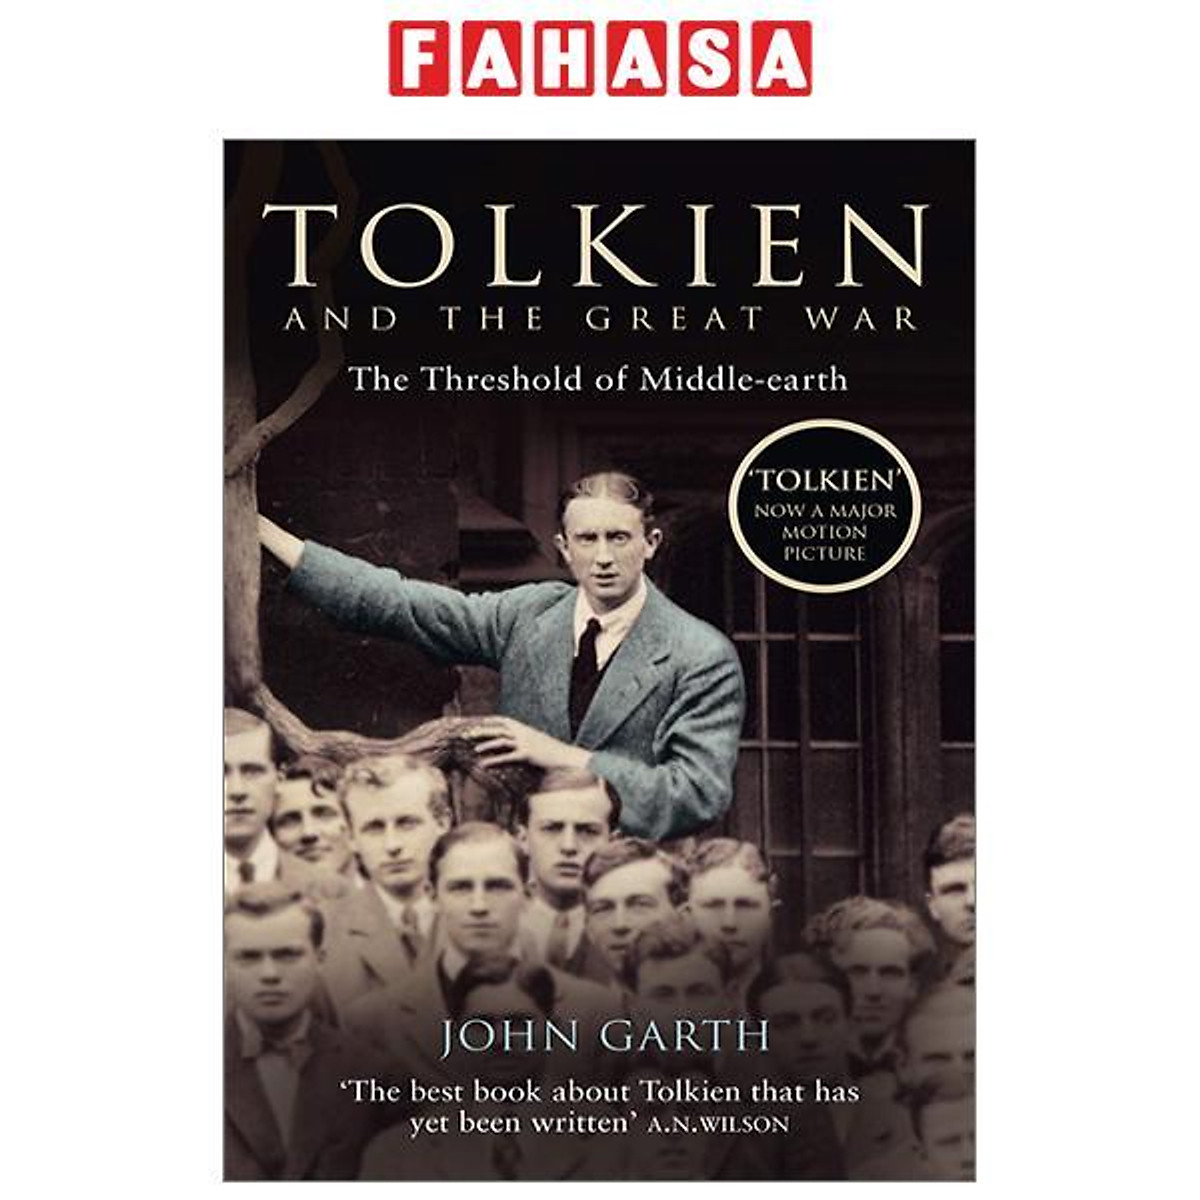 Tolkien And The Great War: The Threshold Of Middle-earth